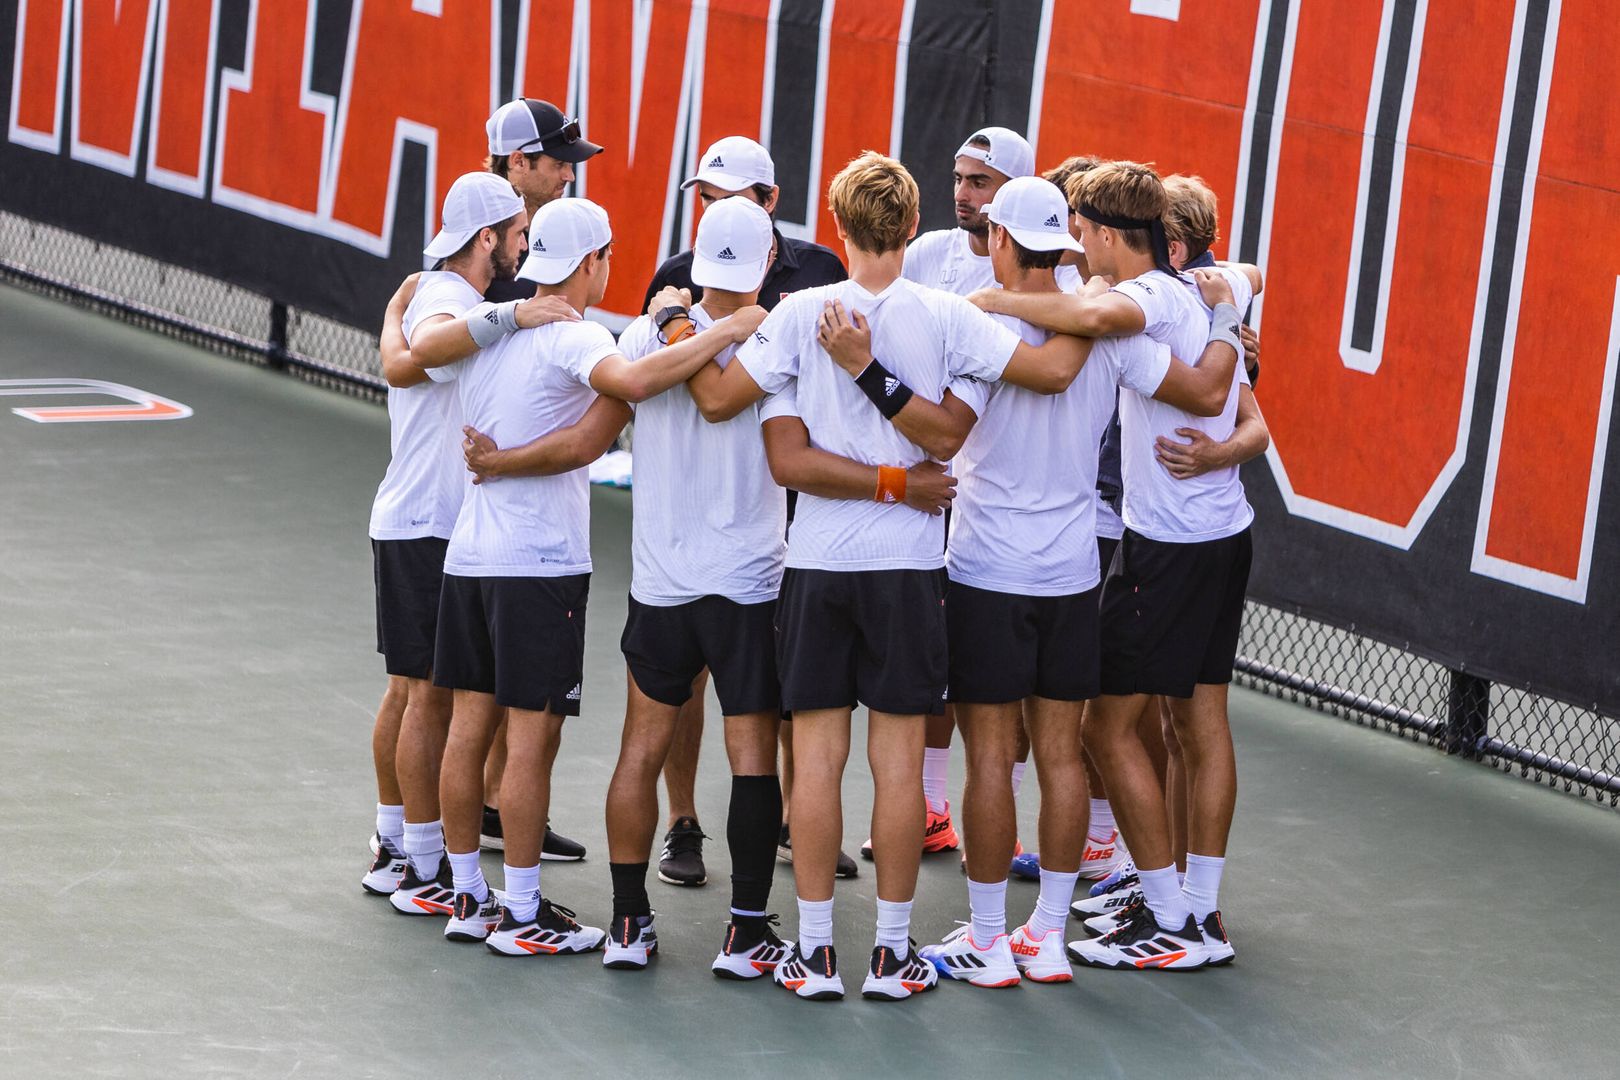 Miami Maintains Top-50 Position in ITA Rankings